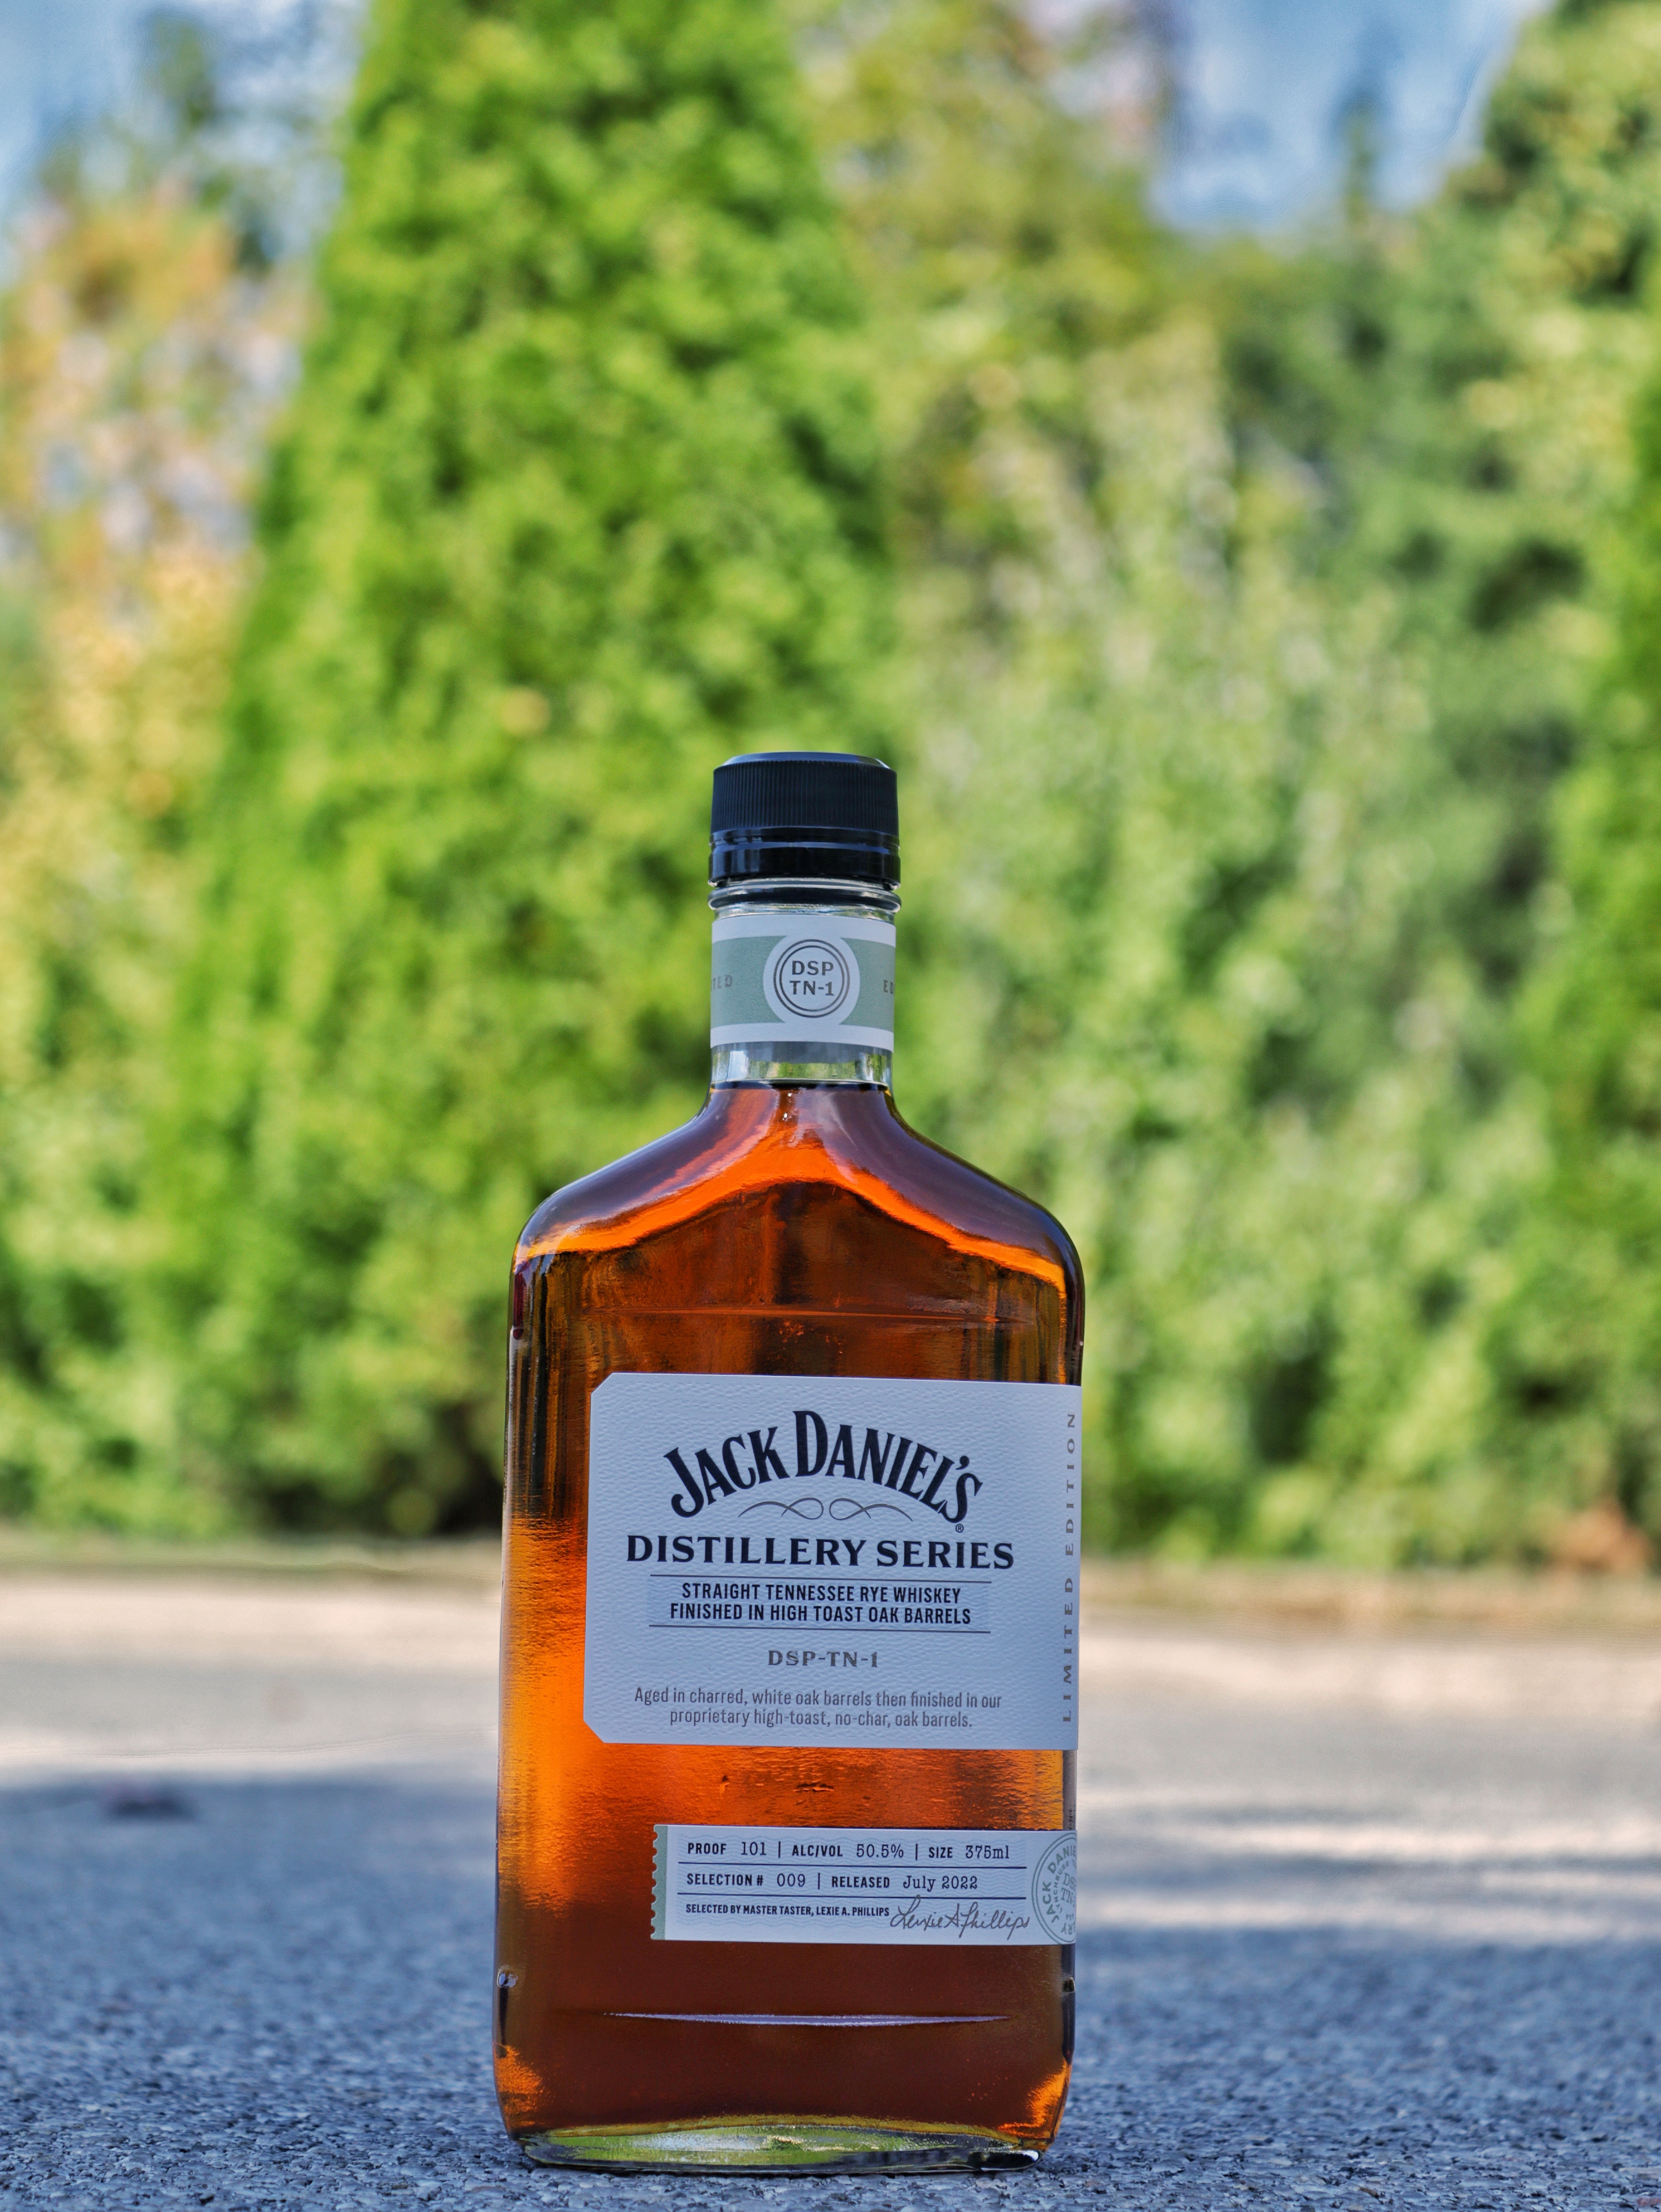 Jack Daniel’s Innovates with Rye Whiskey and Not Bourbon?